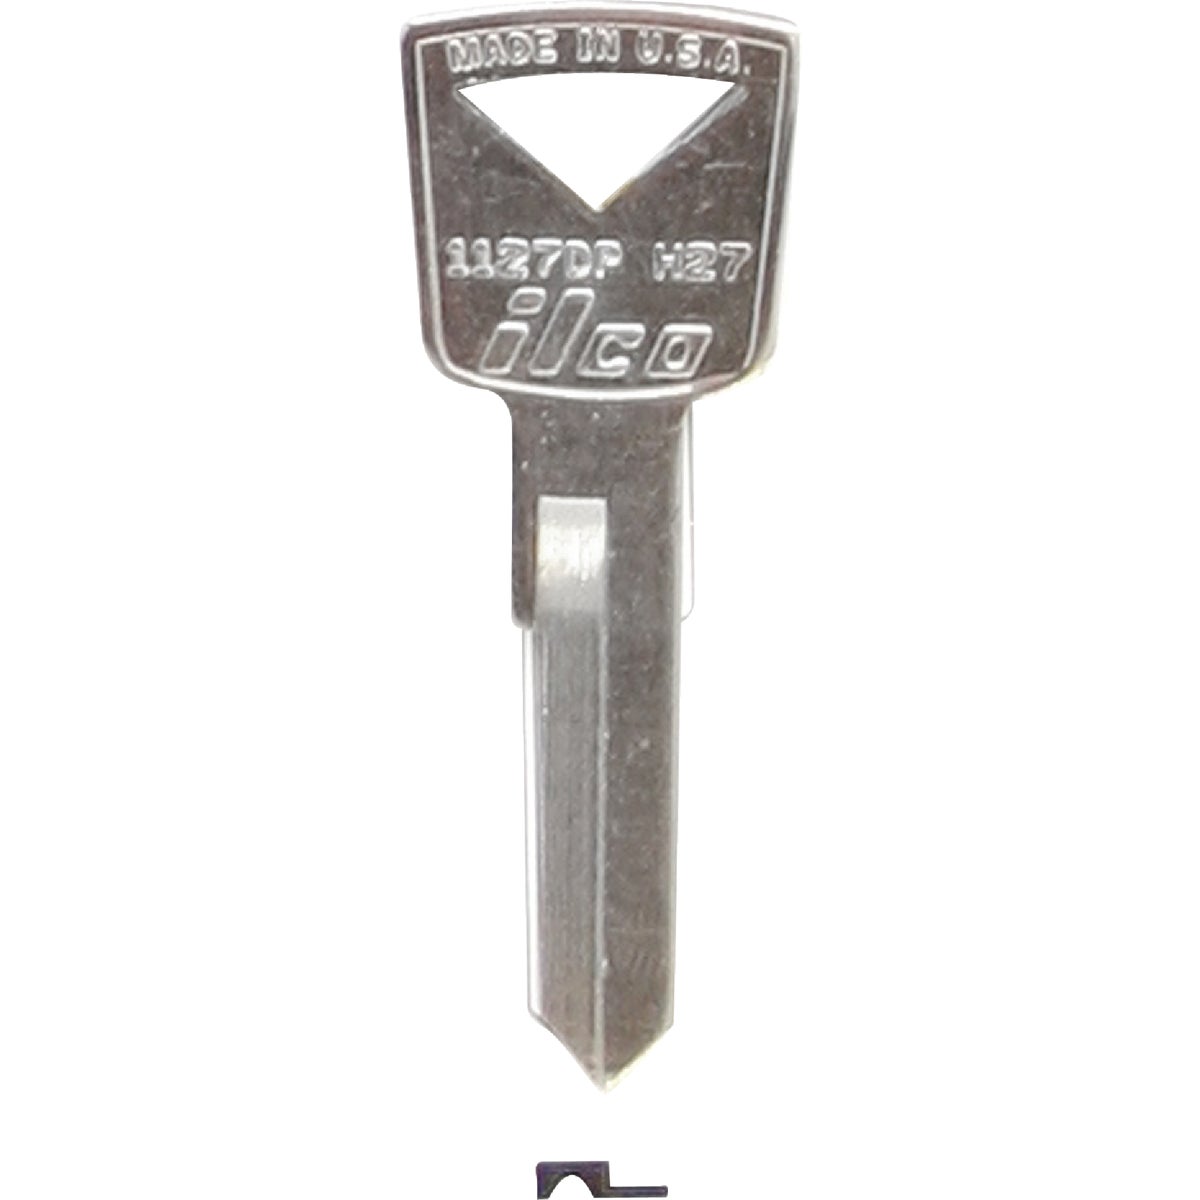 ILCO Ford Nickel Plated Automotive Key H27 / 1127DP (10-Pack)